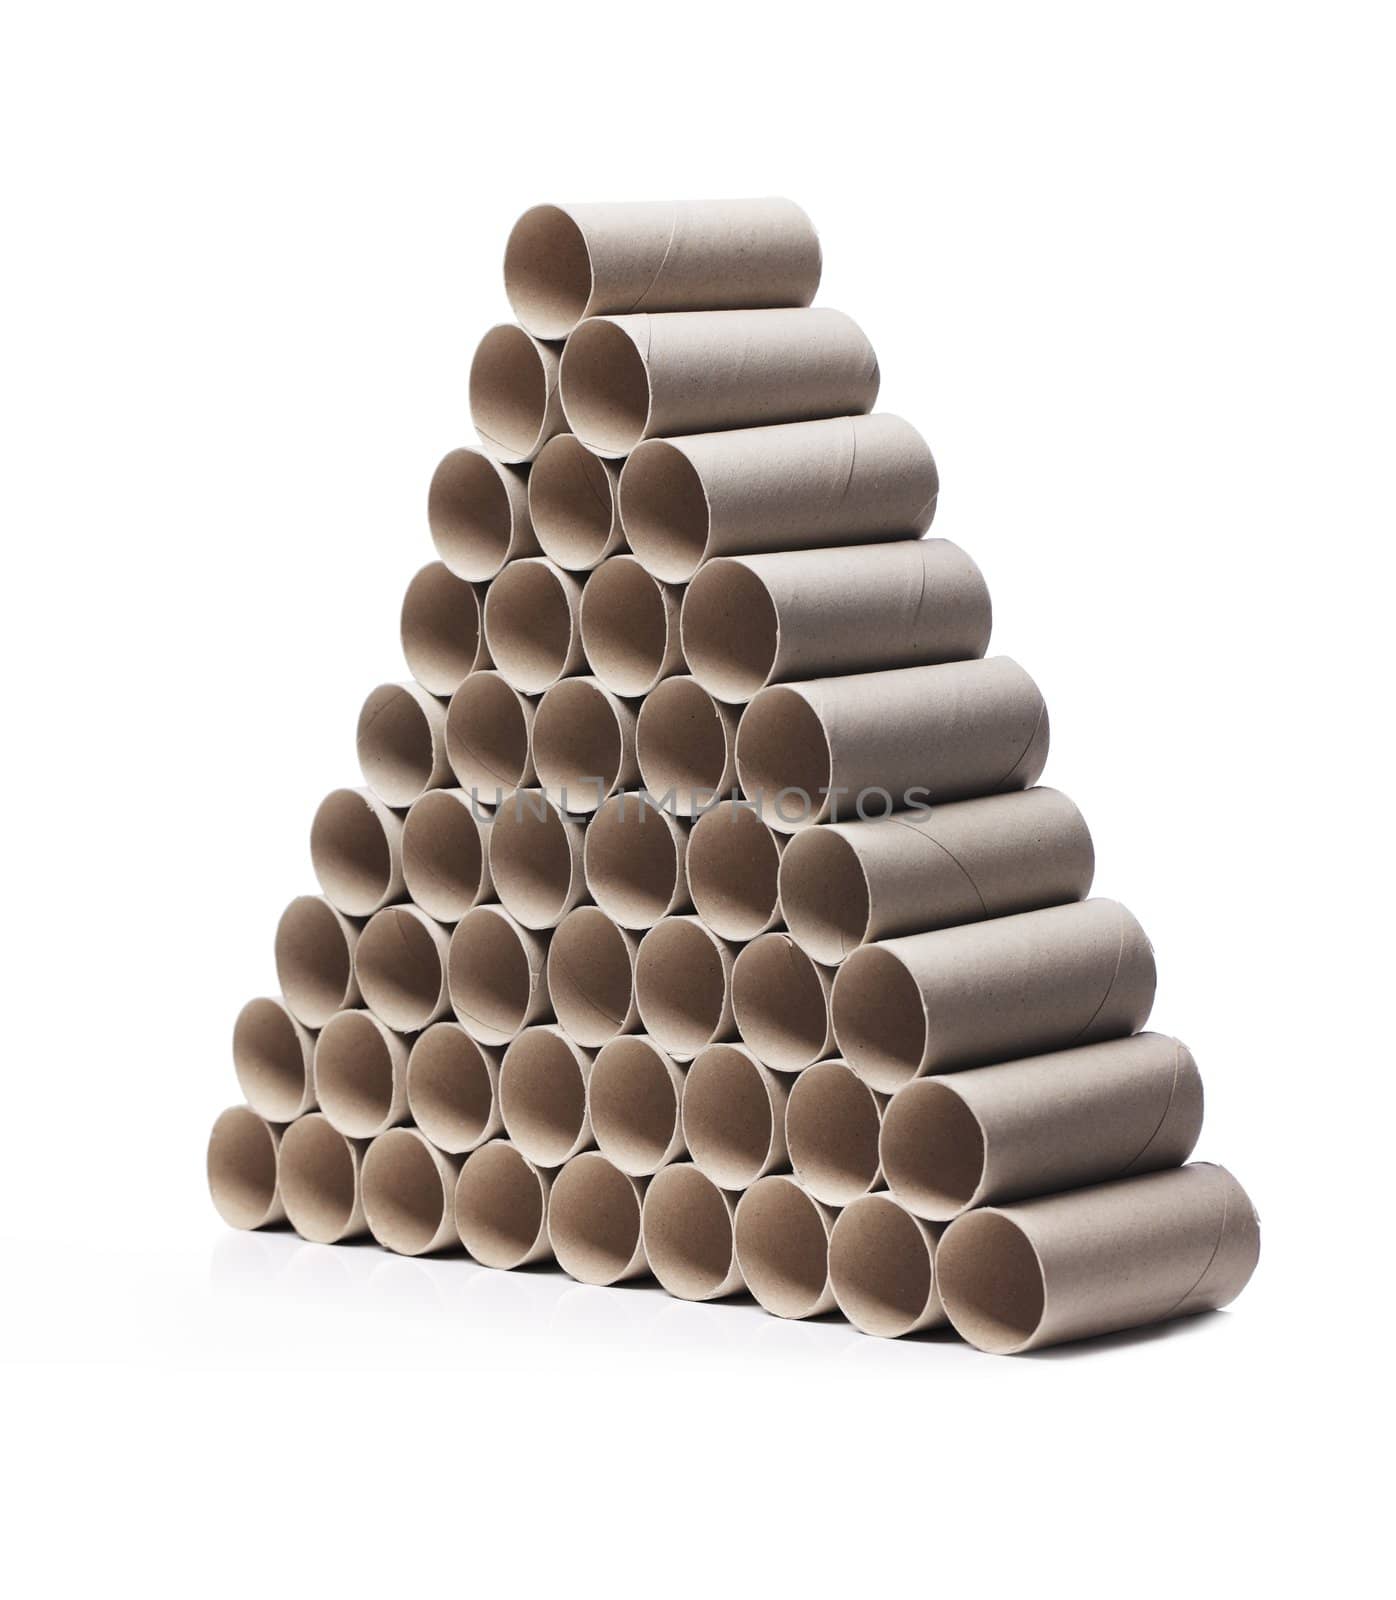 Used toilet paper cardboard rolls stacked in a triangular fashion.